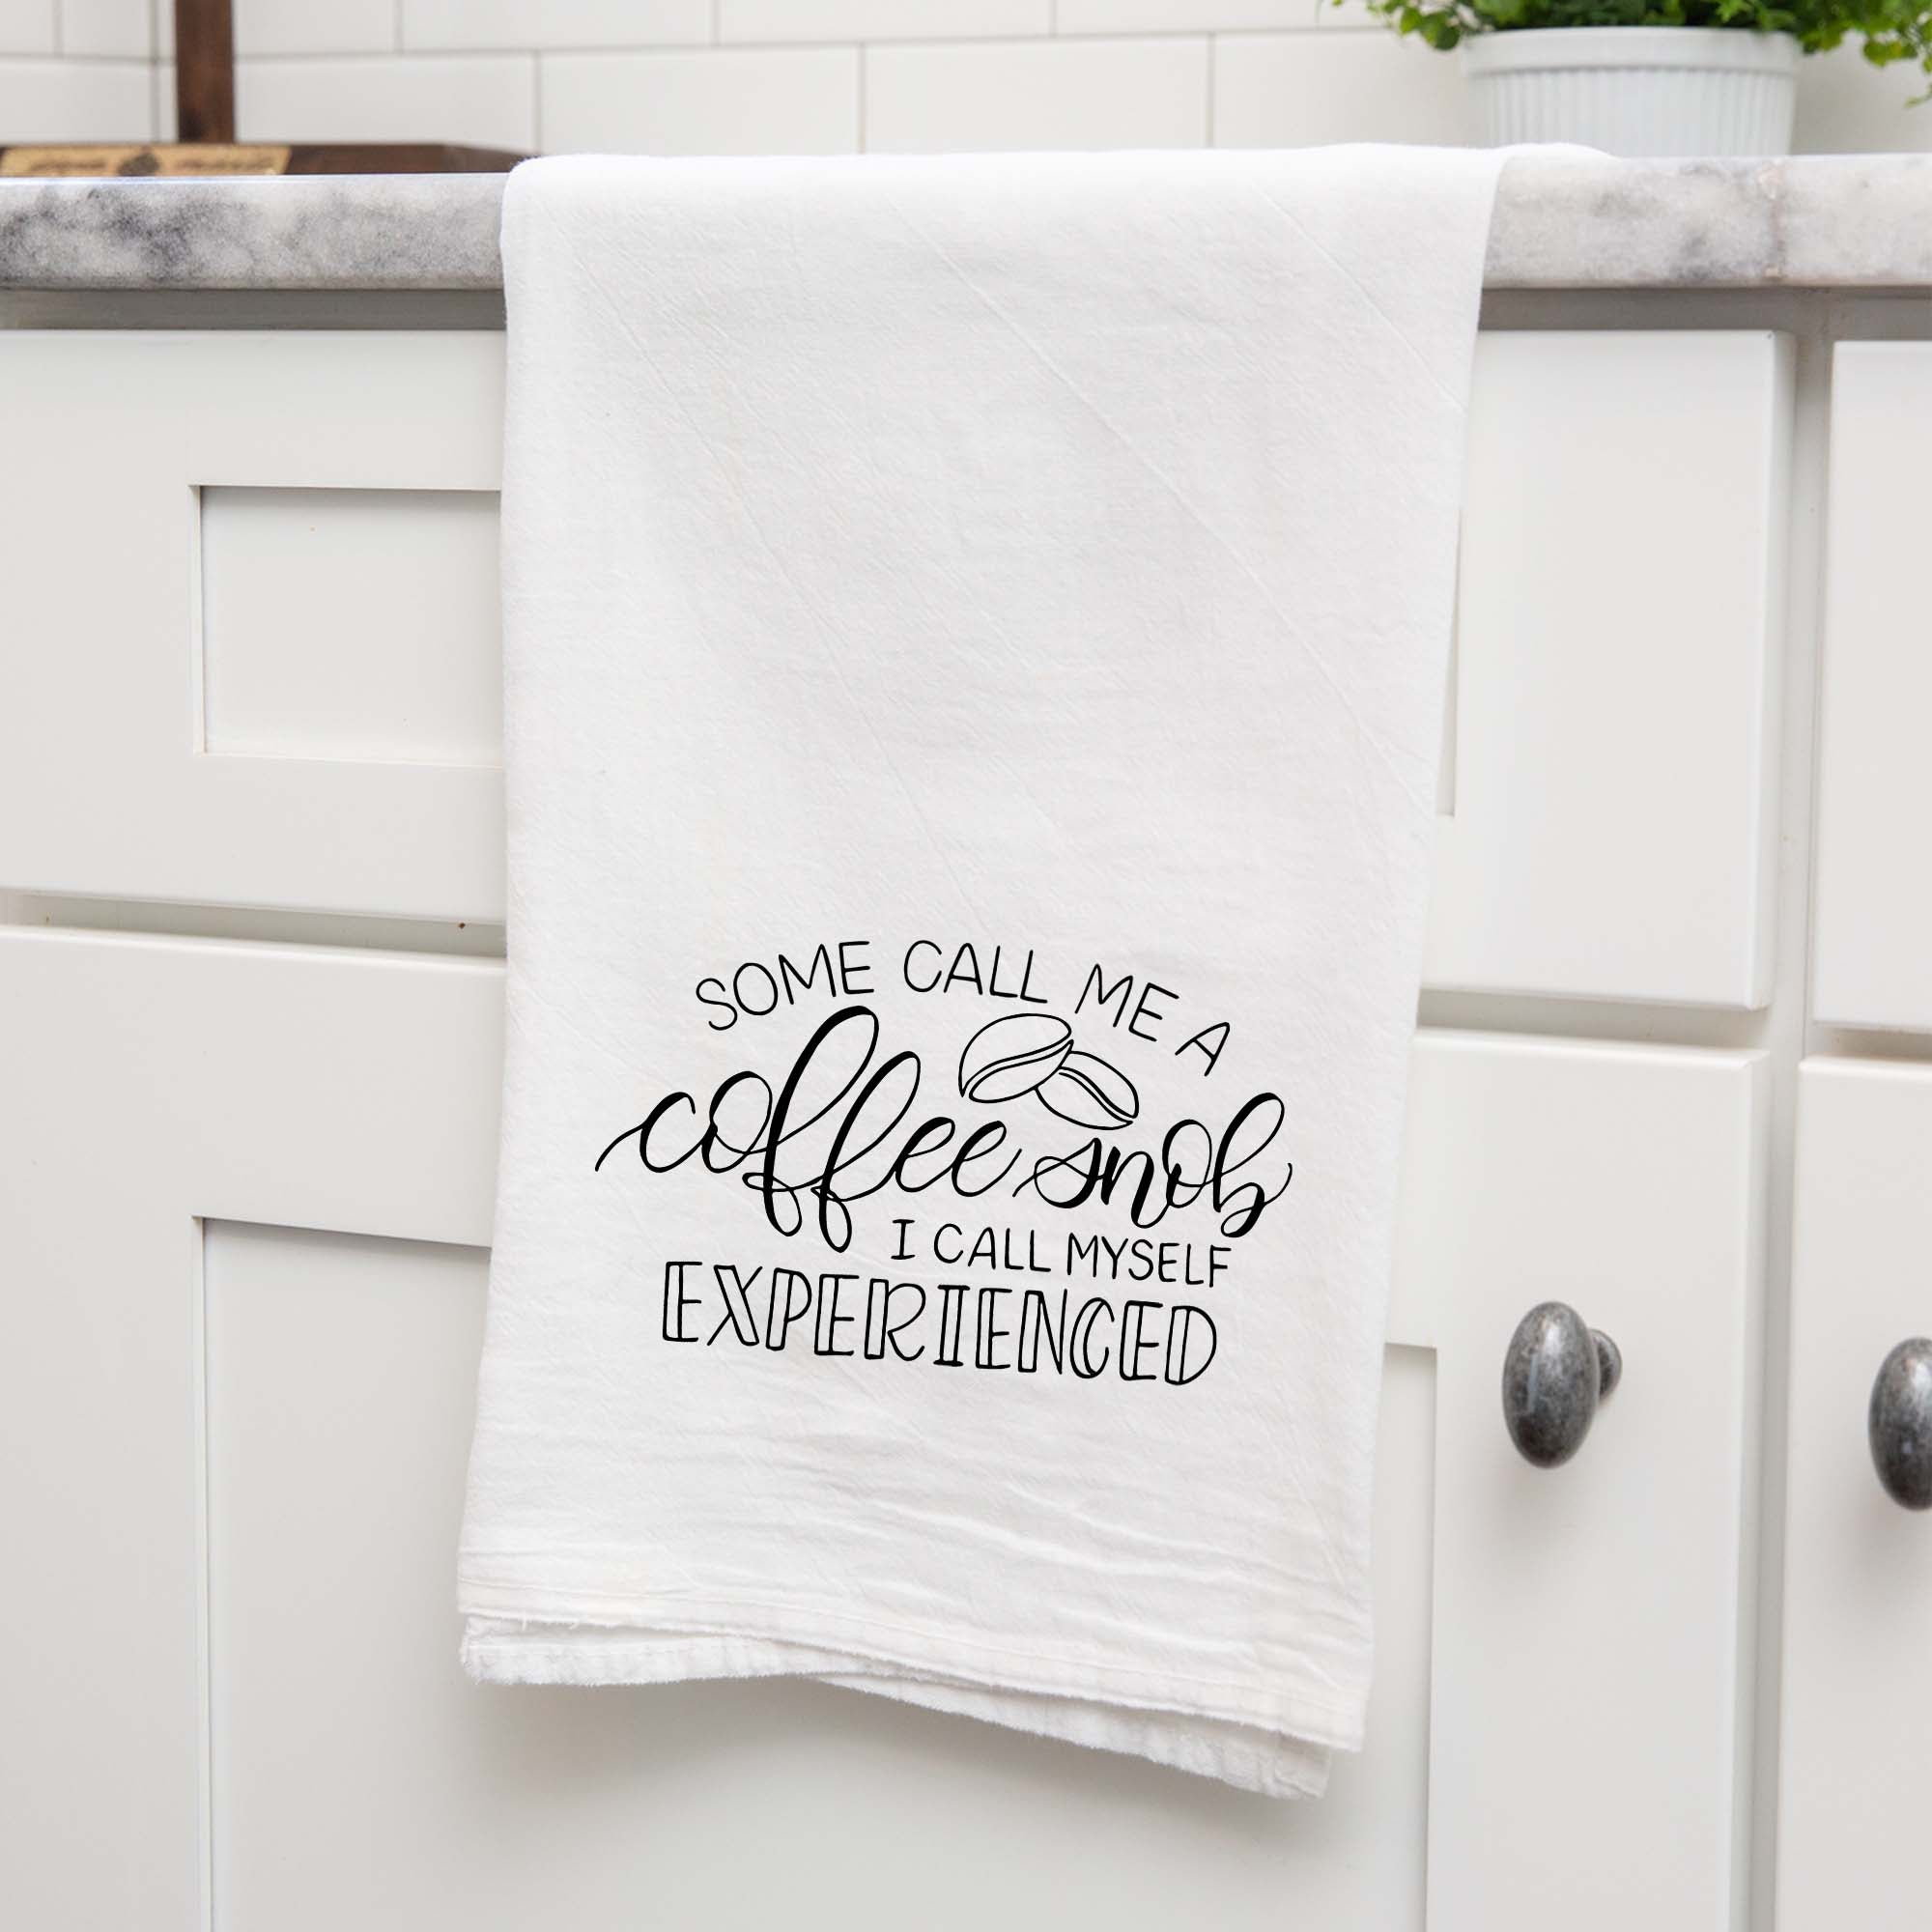 White floursack towel with black hand lettered illustrated design that says Some call me a coffee snob, I call myself experienced with coffee bean doodles shown folded and hanging from a countertop in a modern kitchen